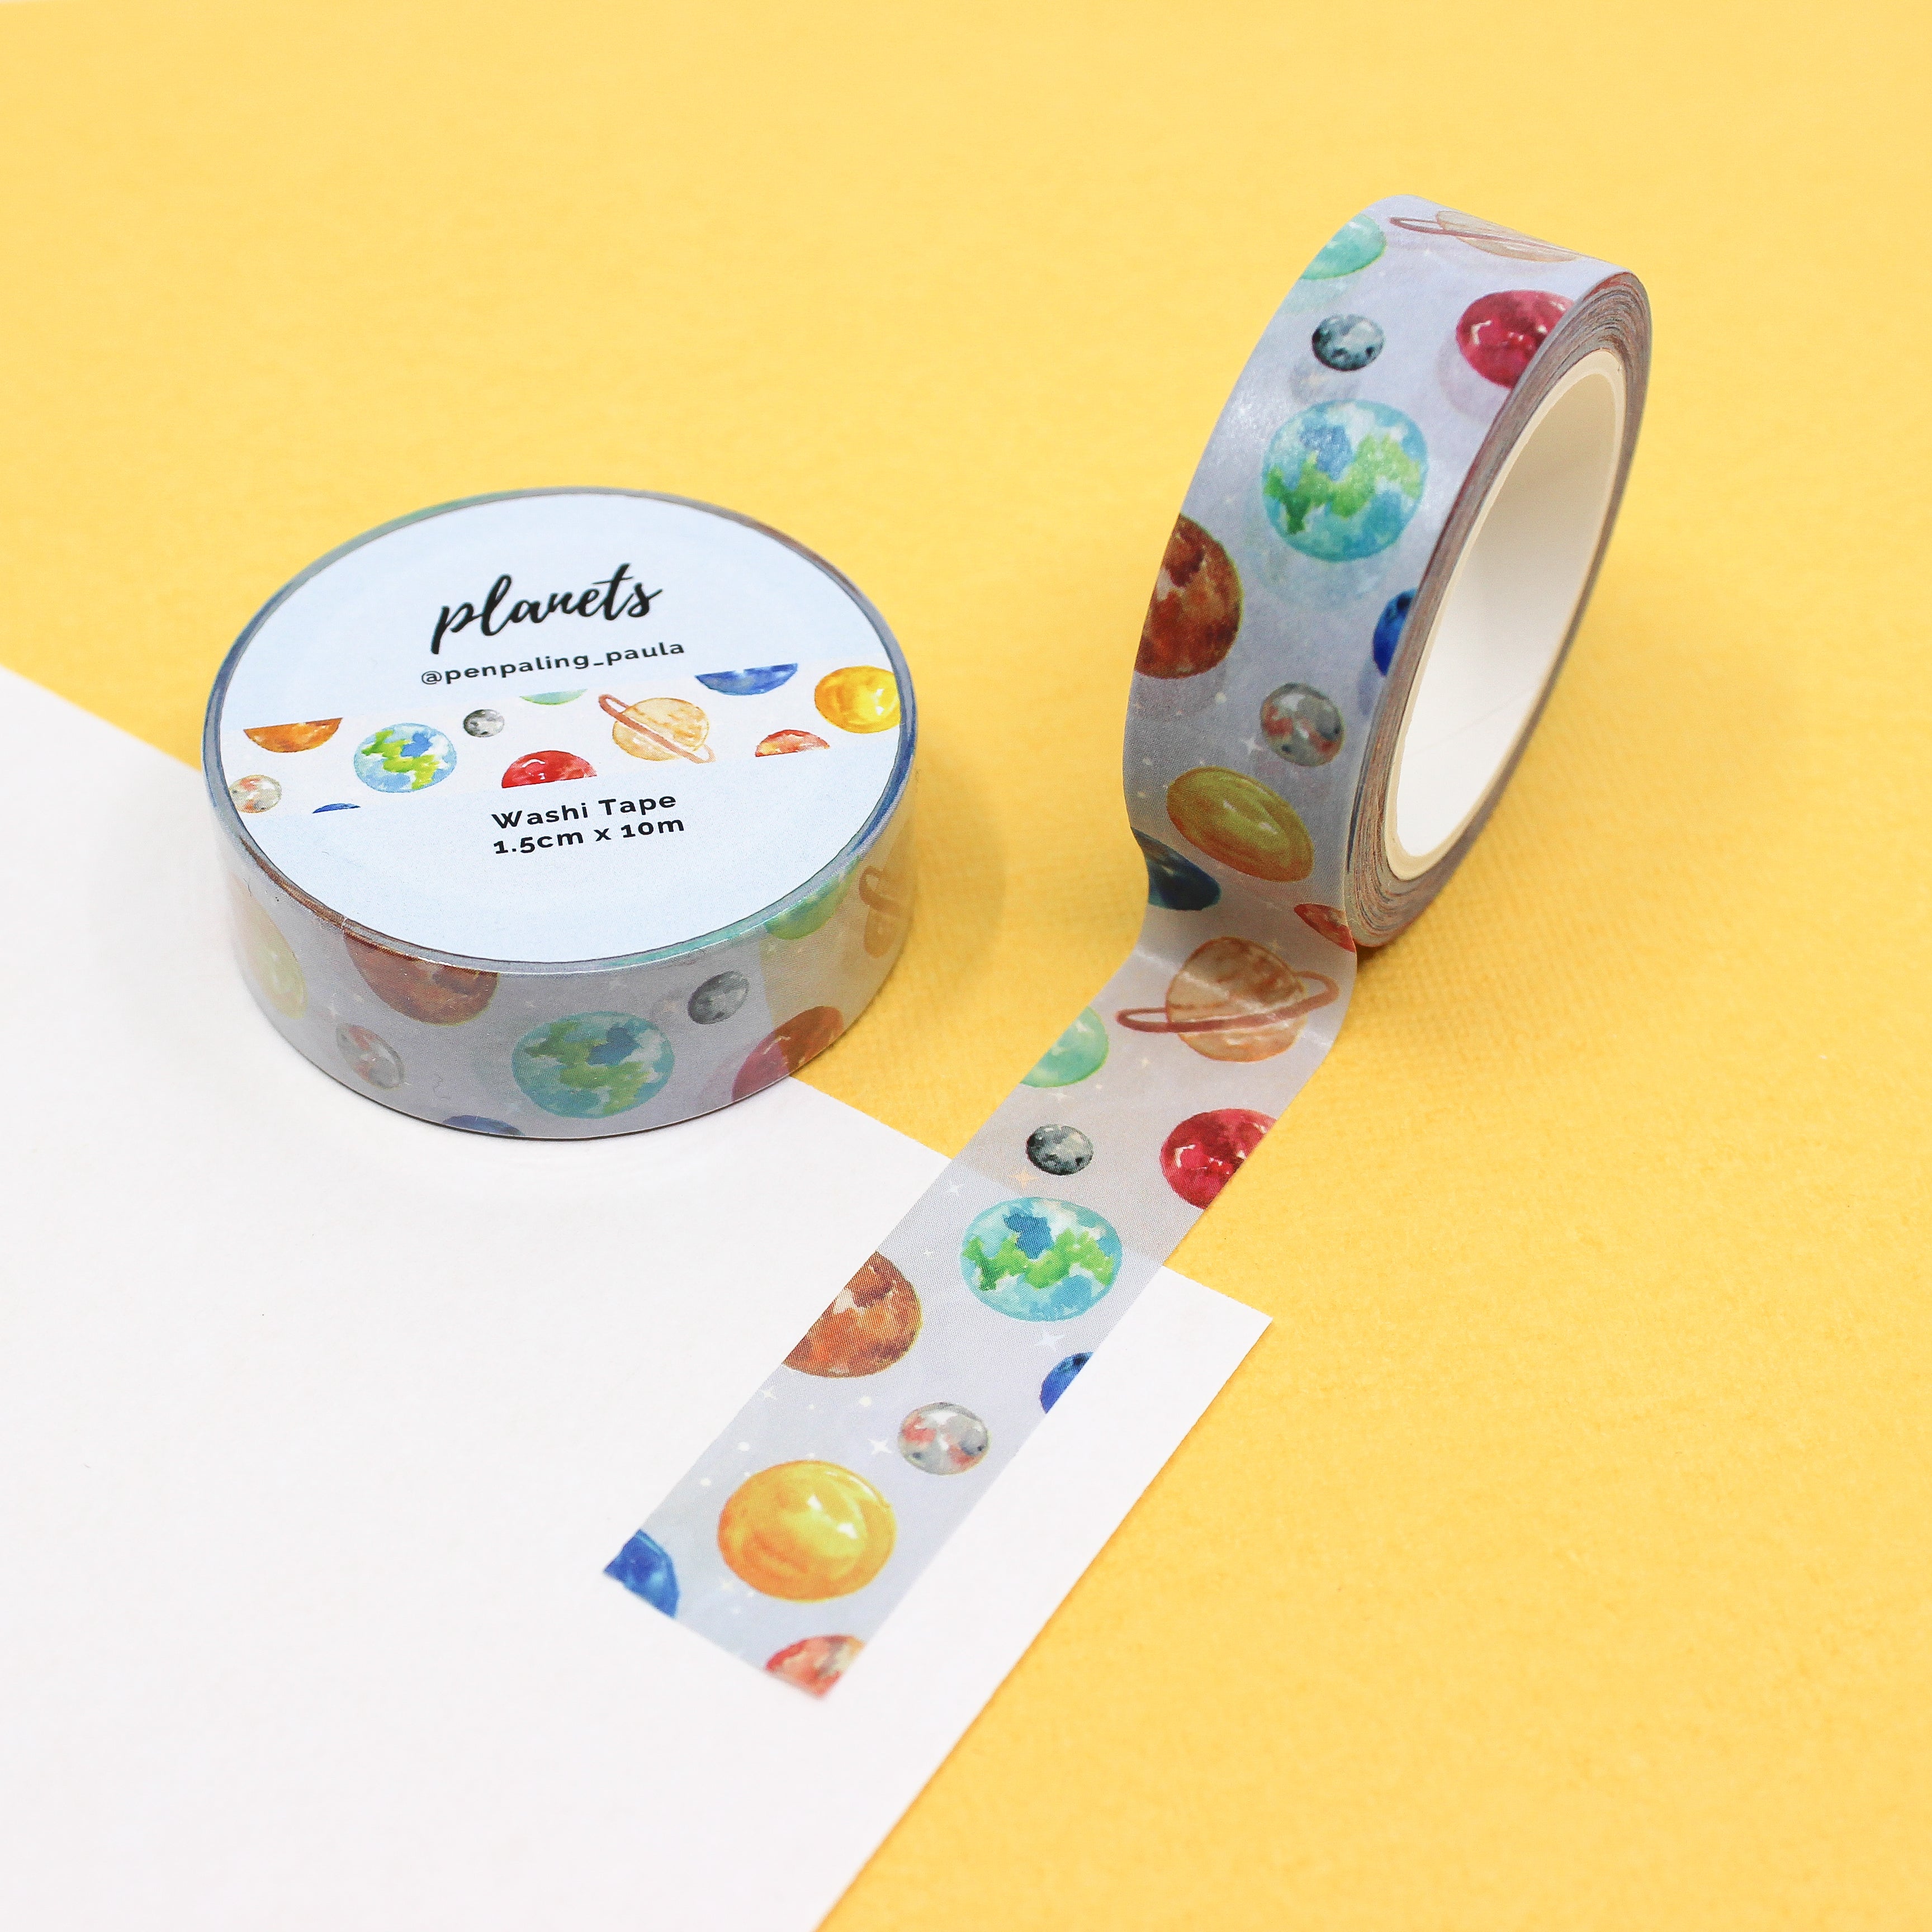 This is a nice view of outer space planets themed washi tape from BBB Supplies Craft Shop